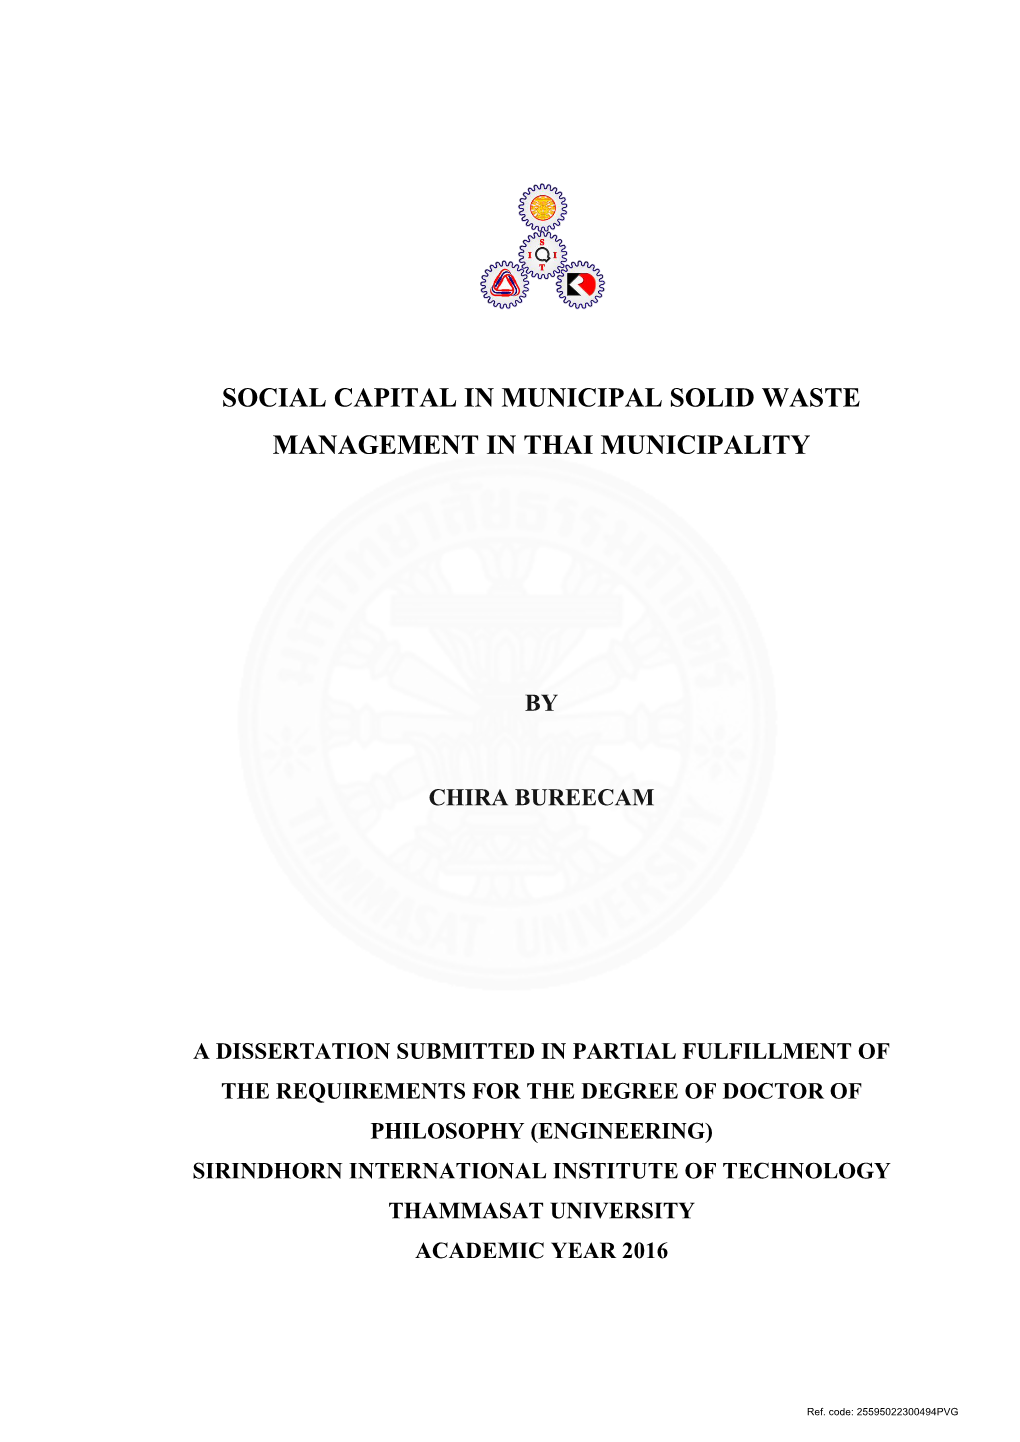 Social Capital in Municipal Solid Waste Management in Thai Municipality